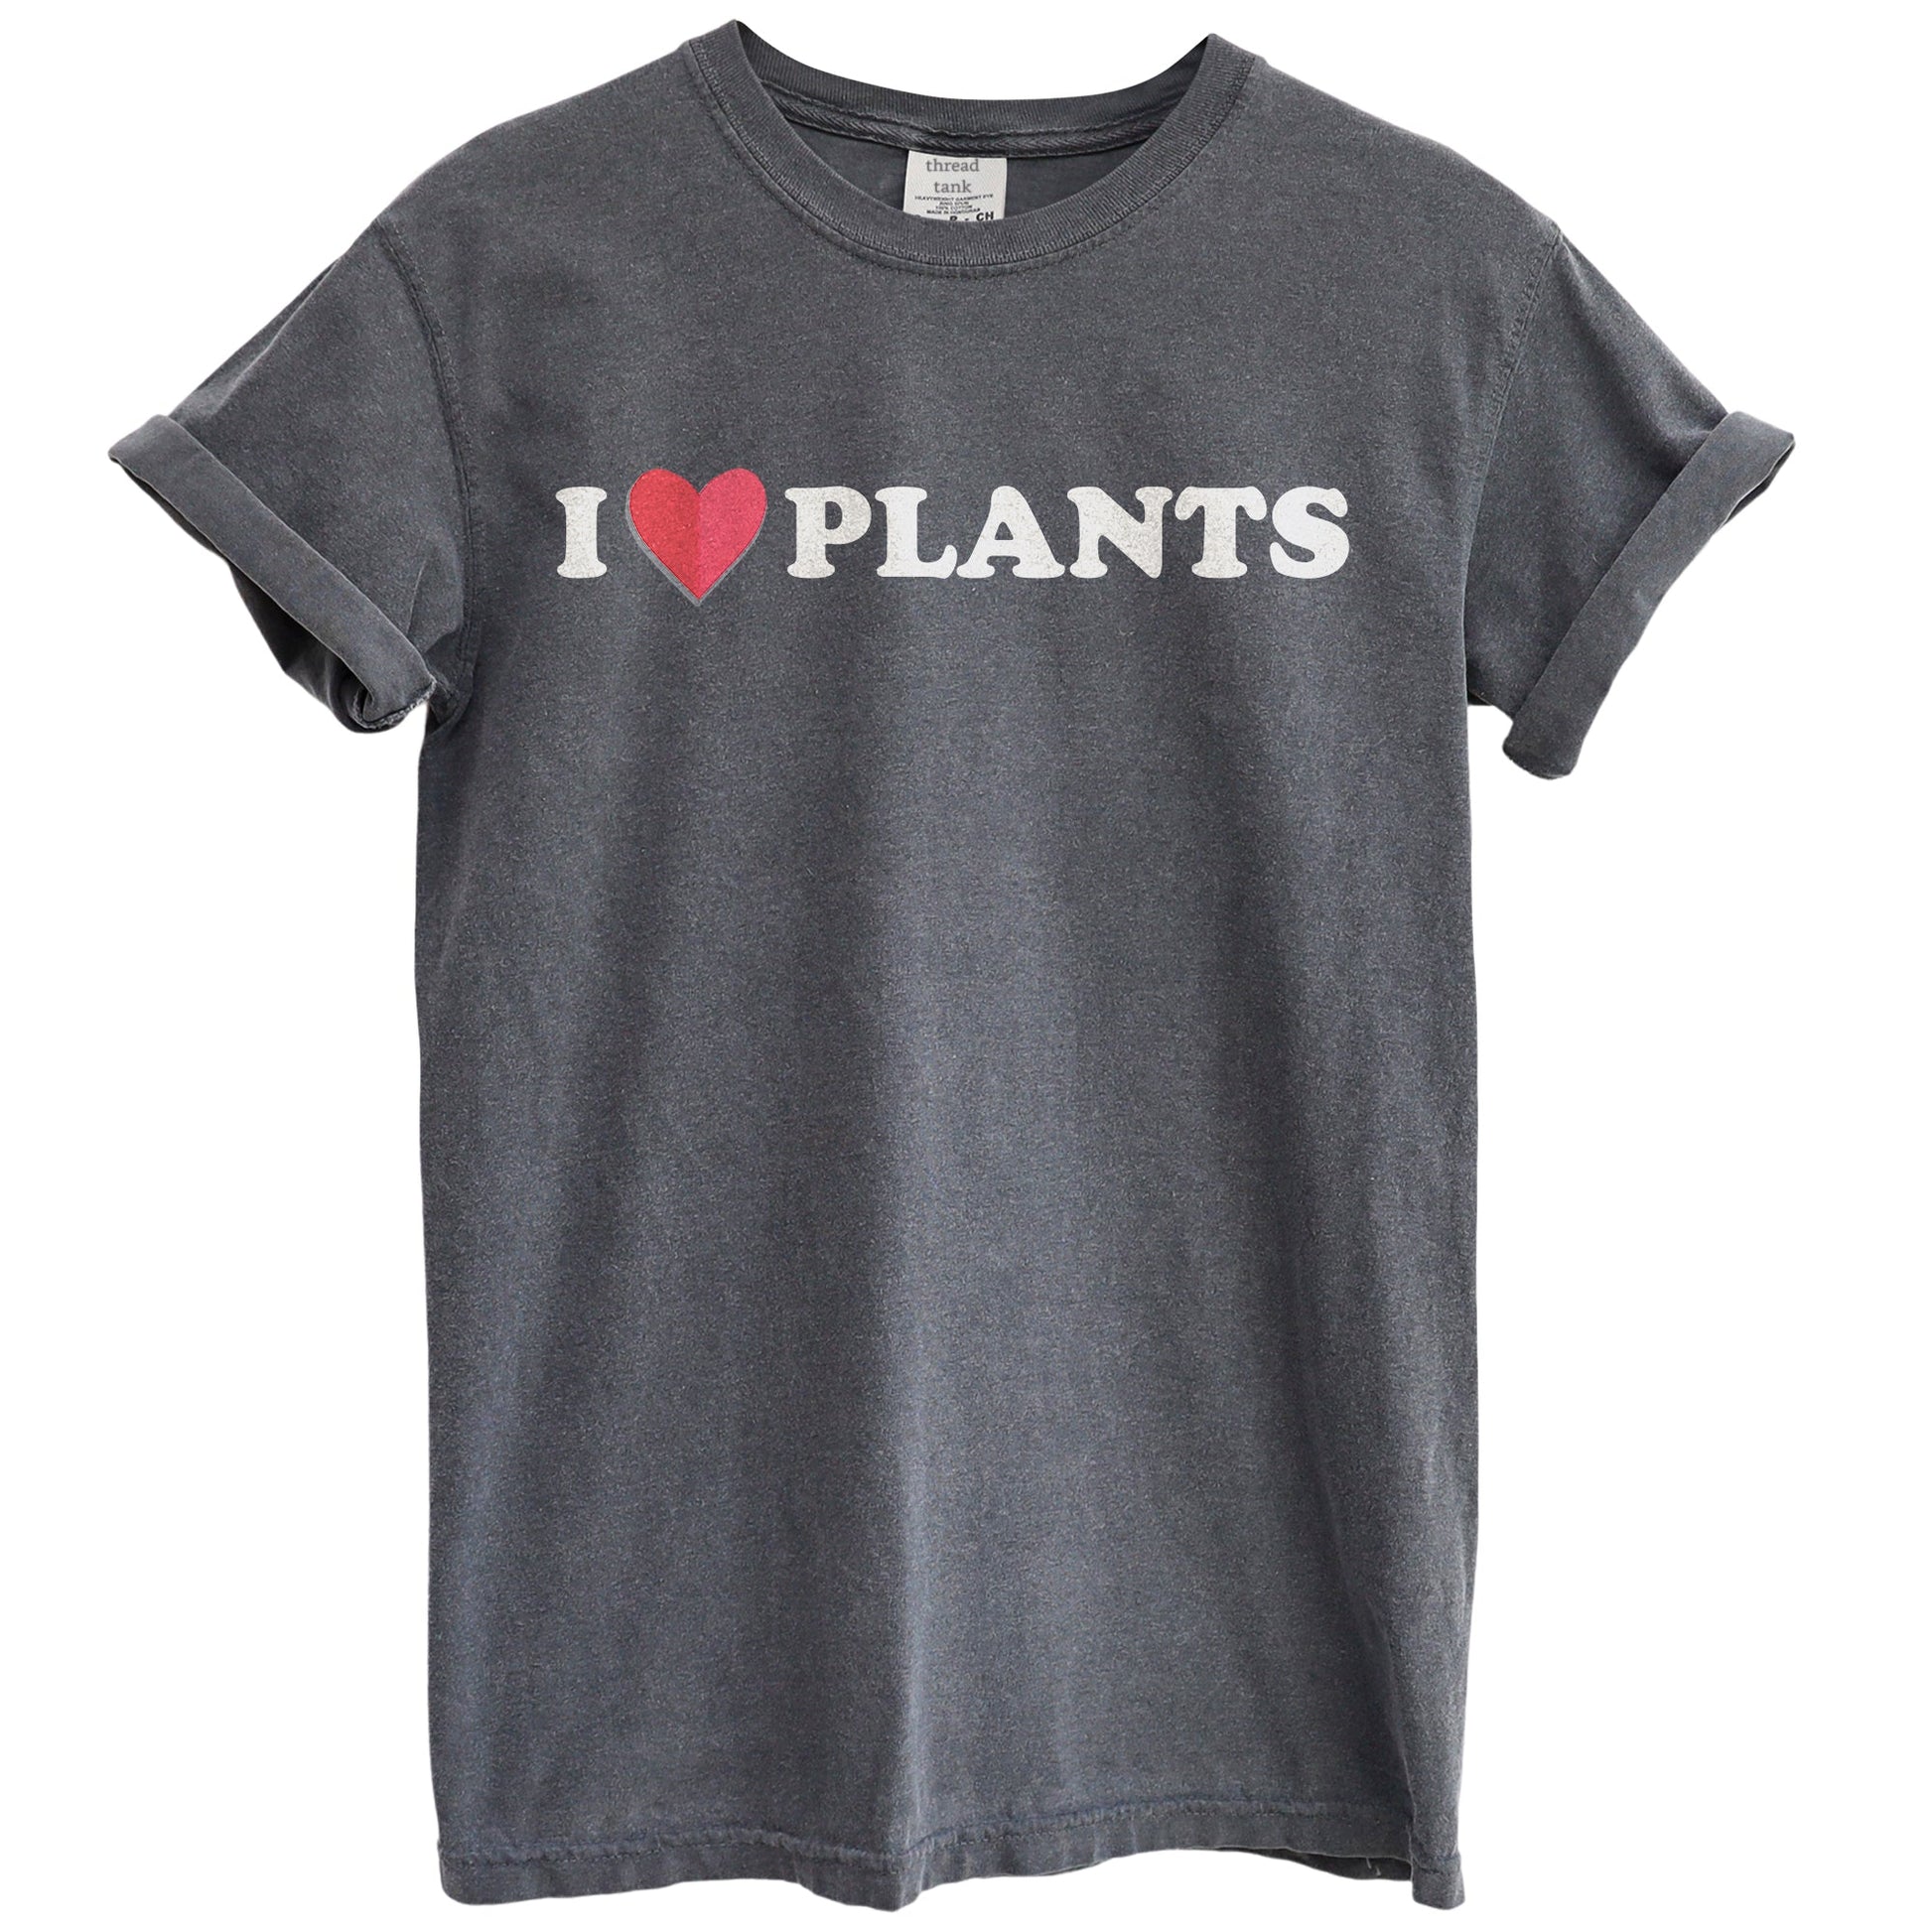 I Heart Plants Garment-Dyed Tee - Stories You Can Wear